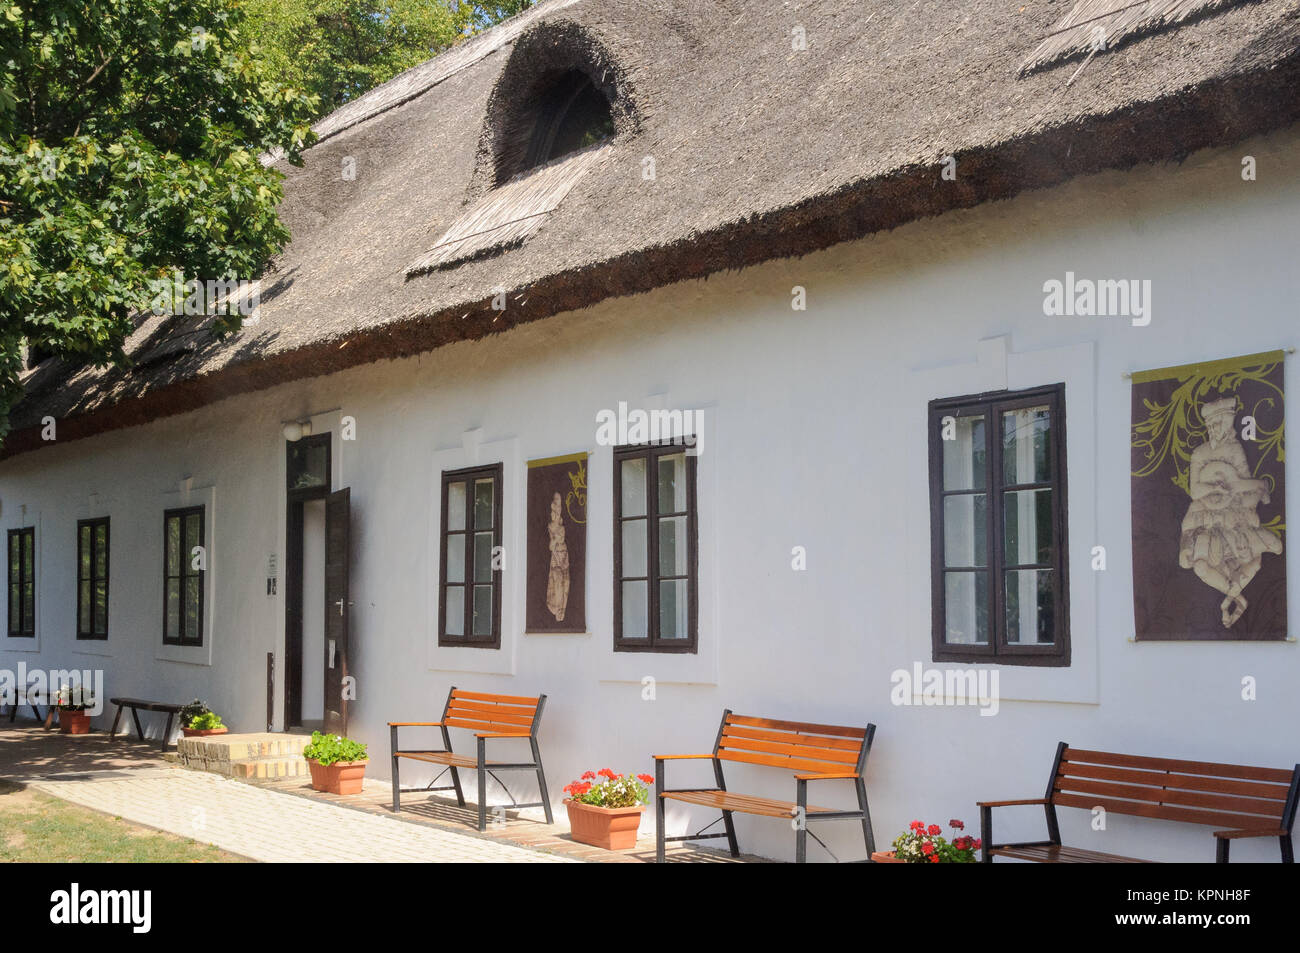 This old peasant house used to host the village school - Szigliget, Hungary Stock Photo